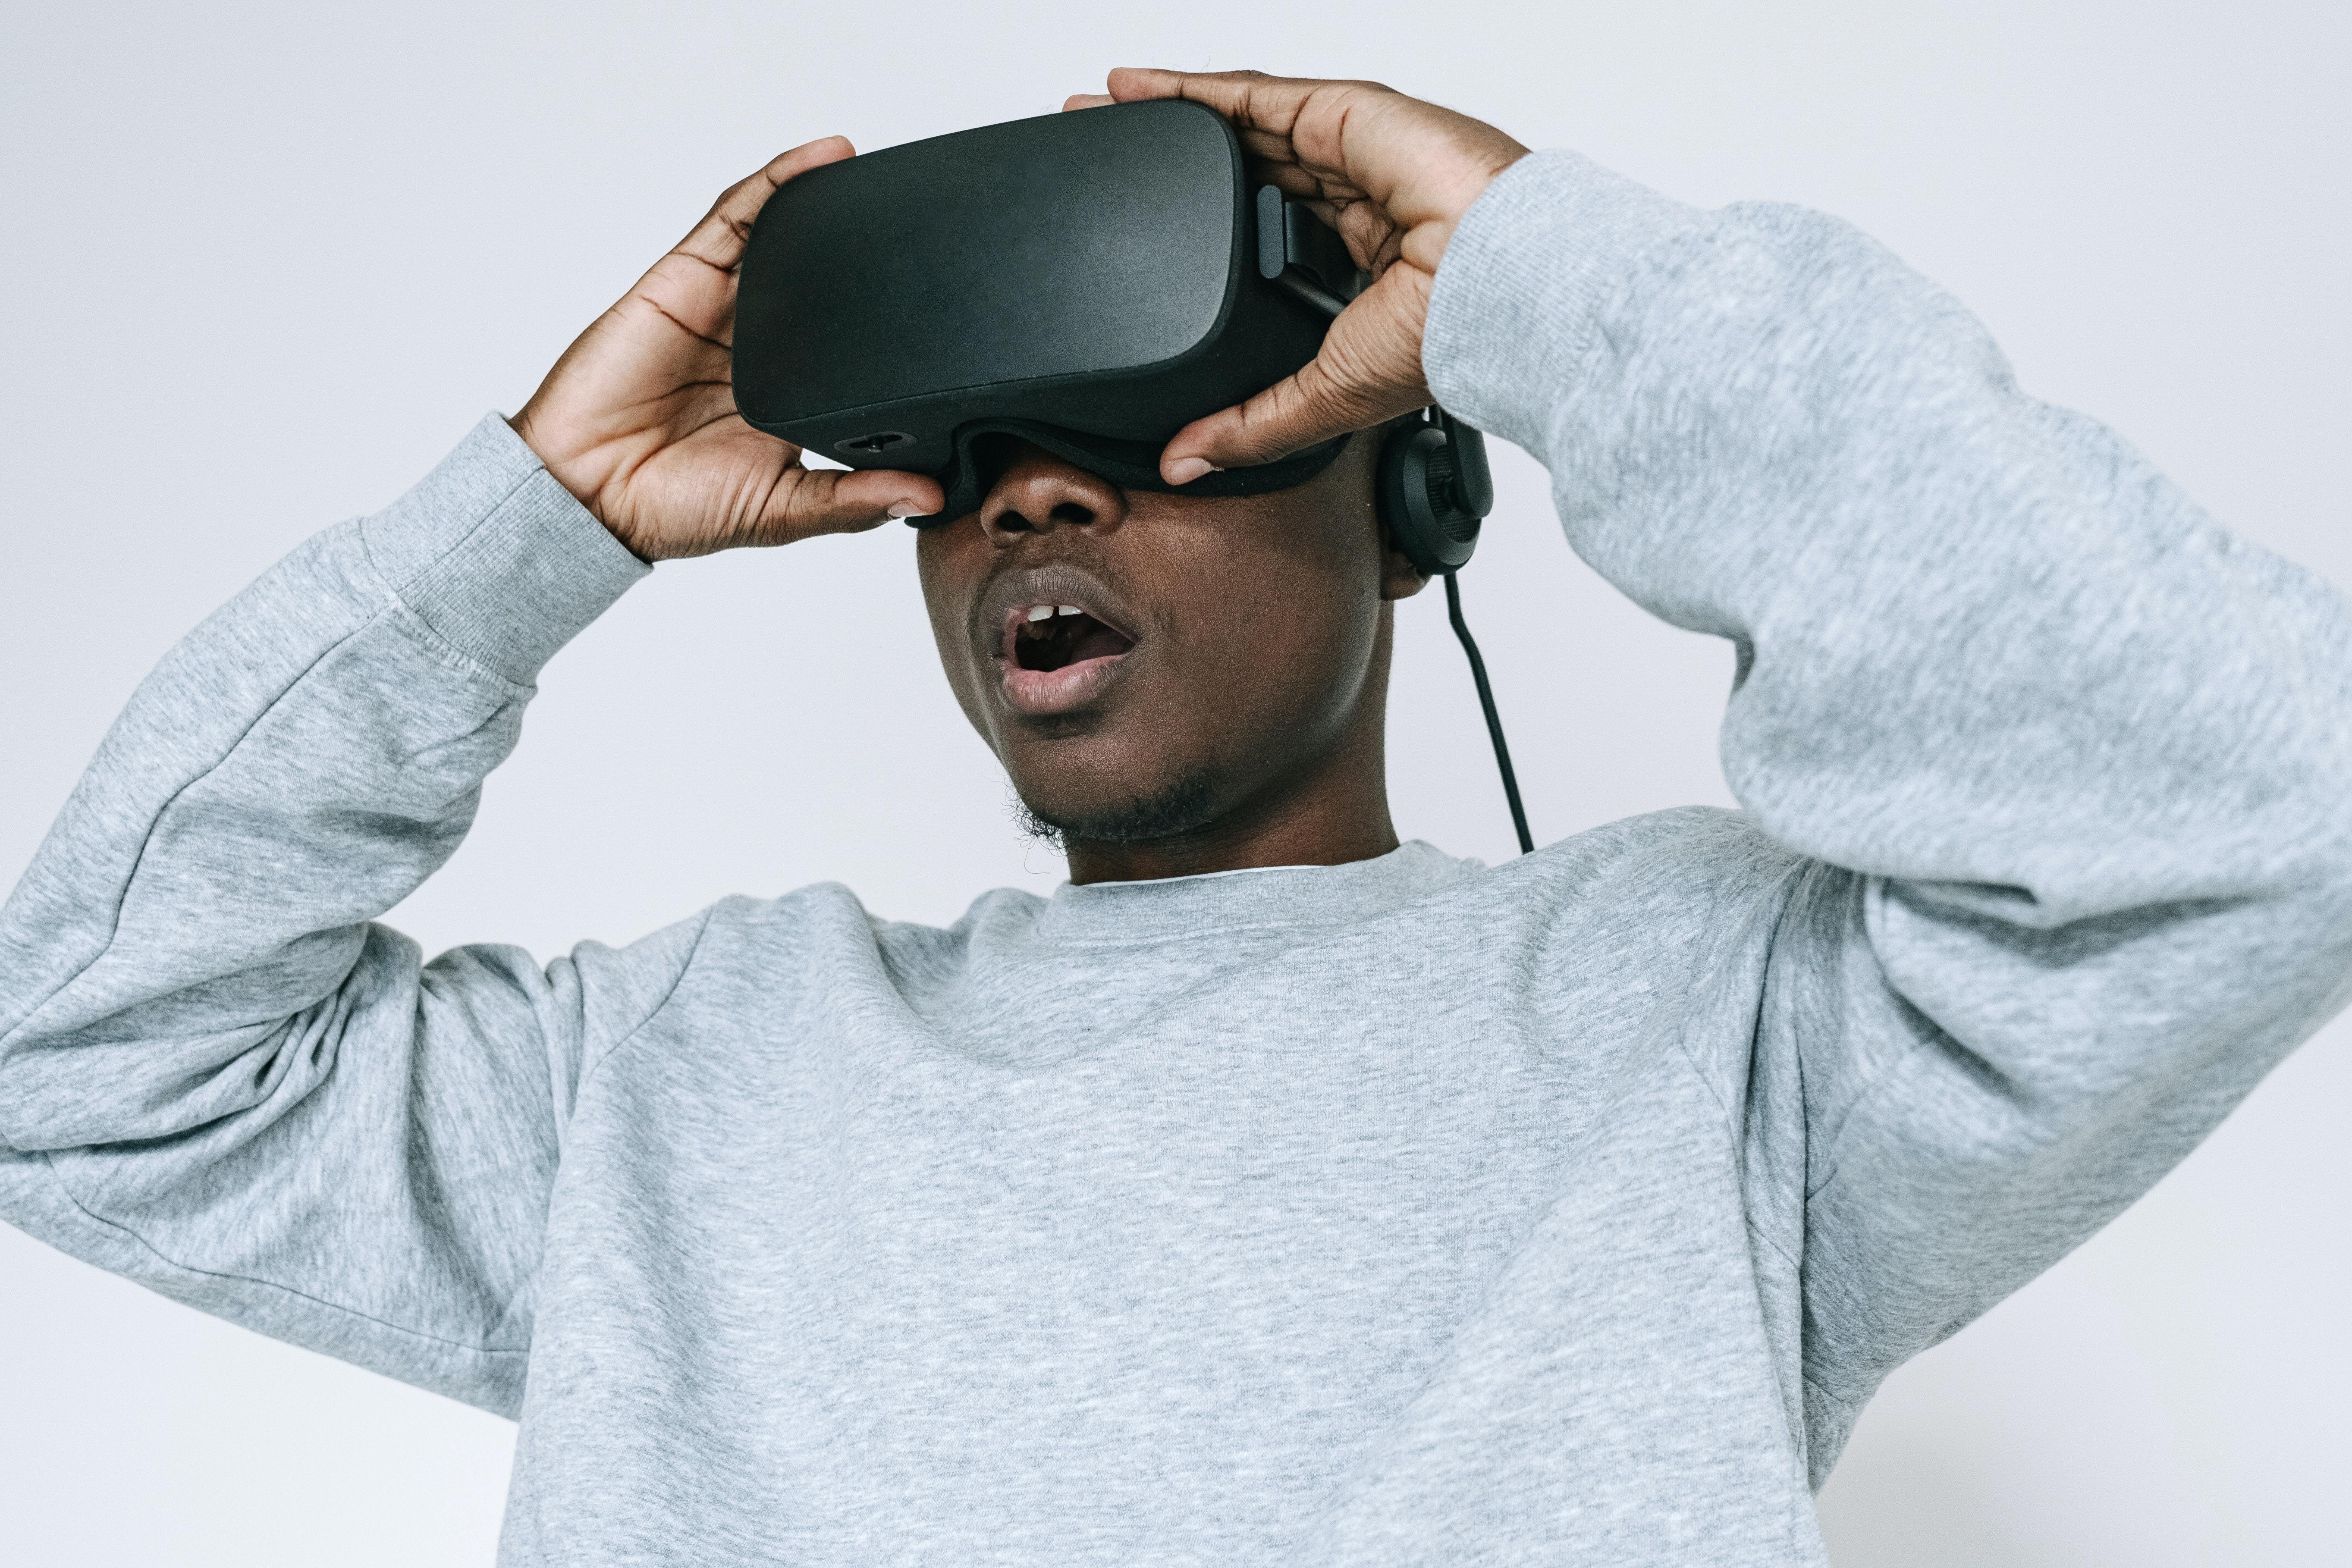  How Much Does It Cost To Make A Vr Headset 